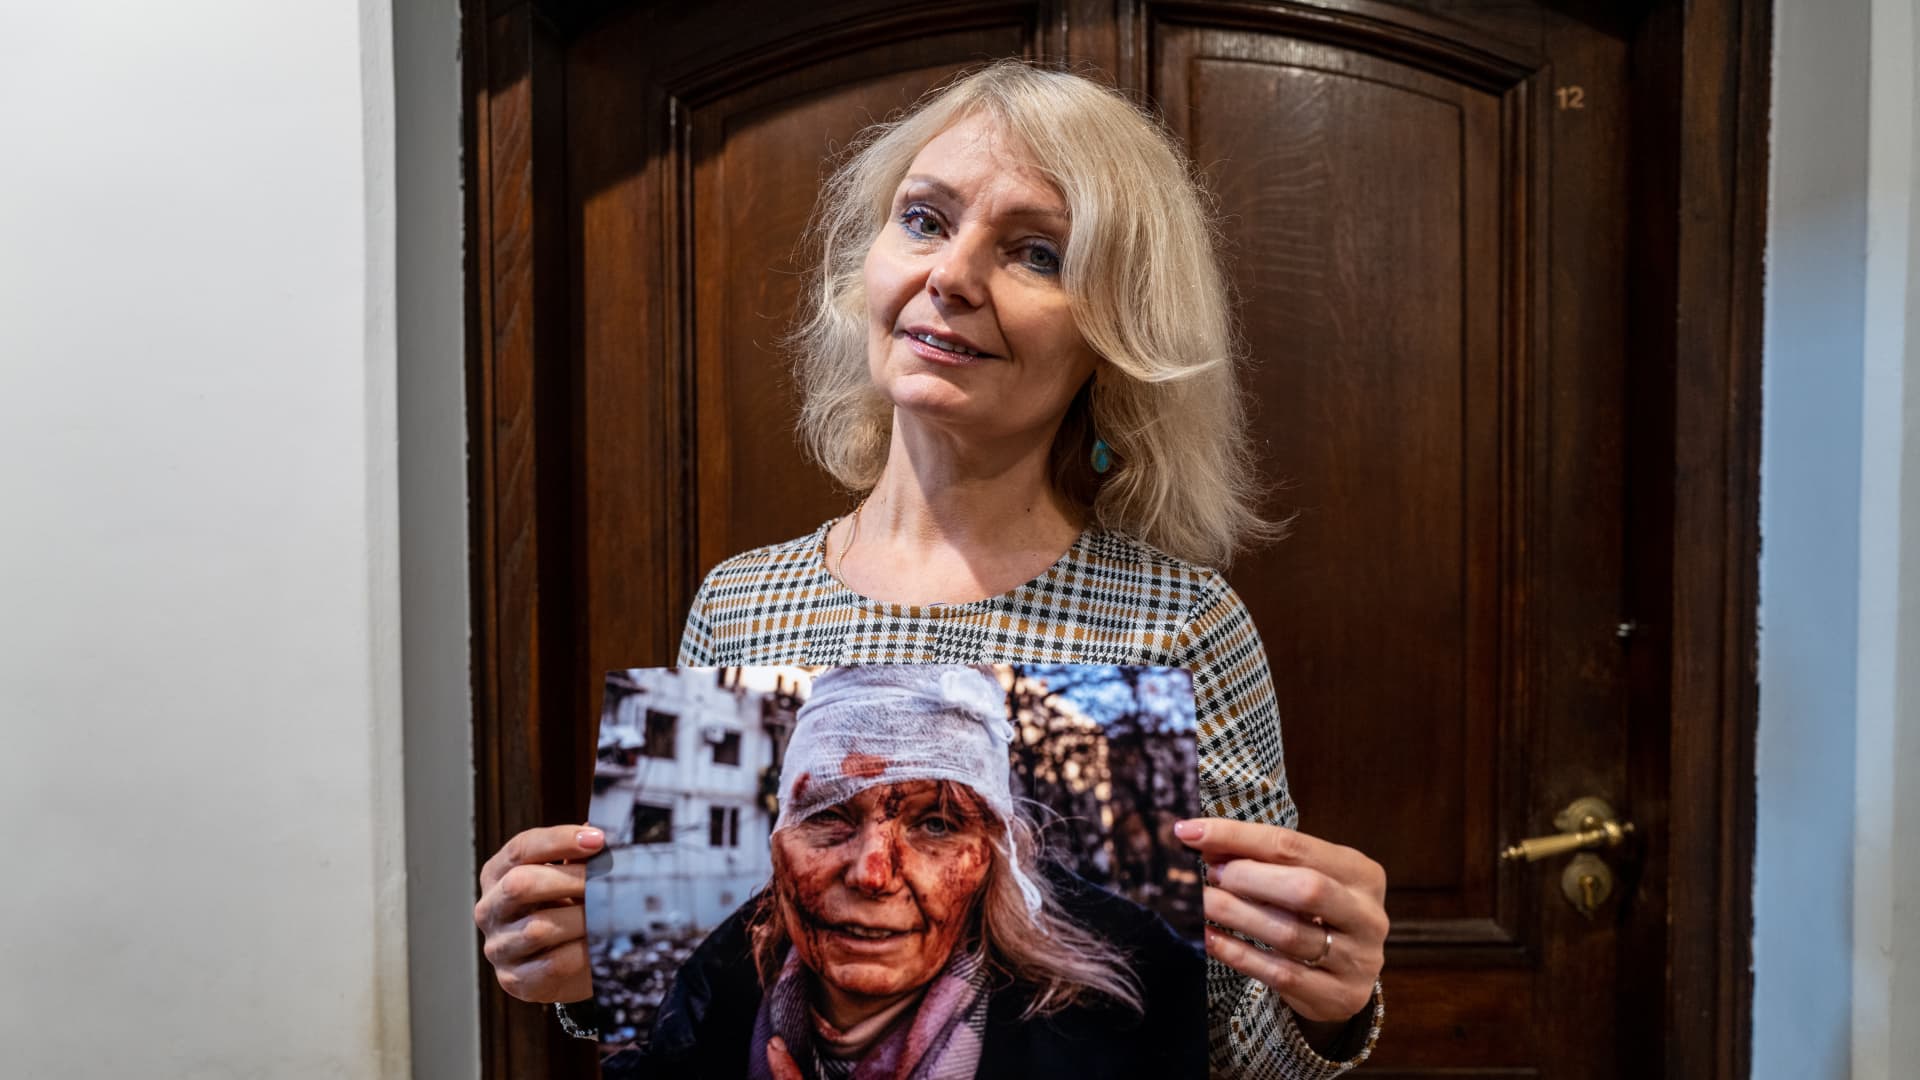 Ukrainian teacher Olena Kurilo, who has become the symbol of the Russia-Ukraine war with her iconic photo -- her head wrapped in a bandage, her face caked with blood after the airstrike -- that Anadolu Agency photojournalist Wolfgang Schwan took on Feb. 24, poses with her iconic photo during an exclusive interview for Anadolu Agency in Warsaw, Poland on November 09, 2022. 